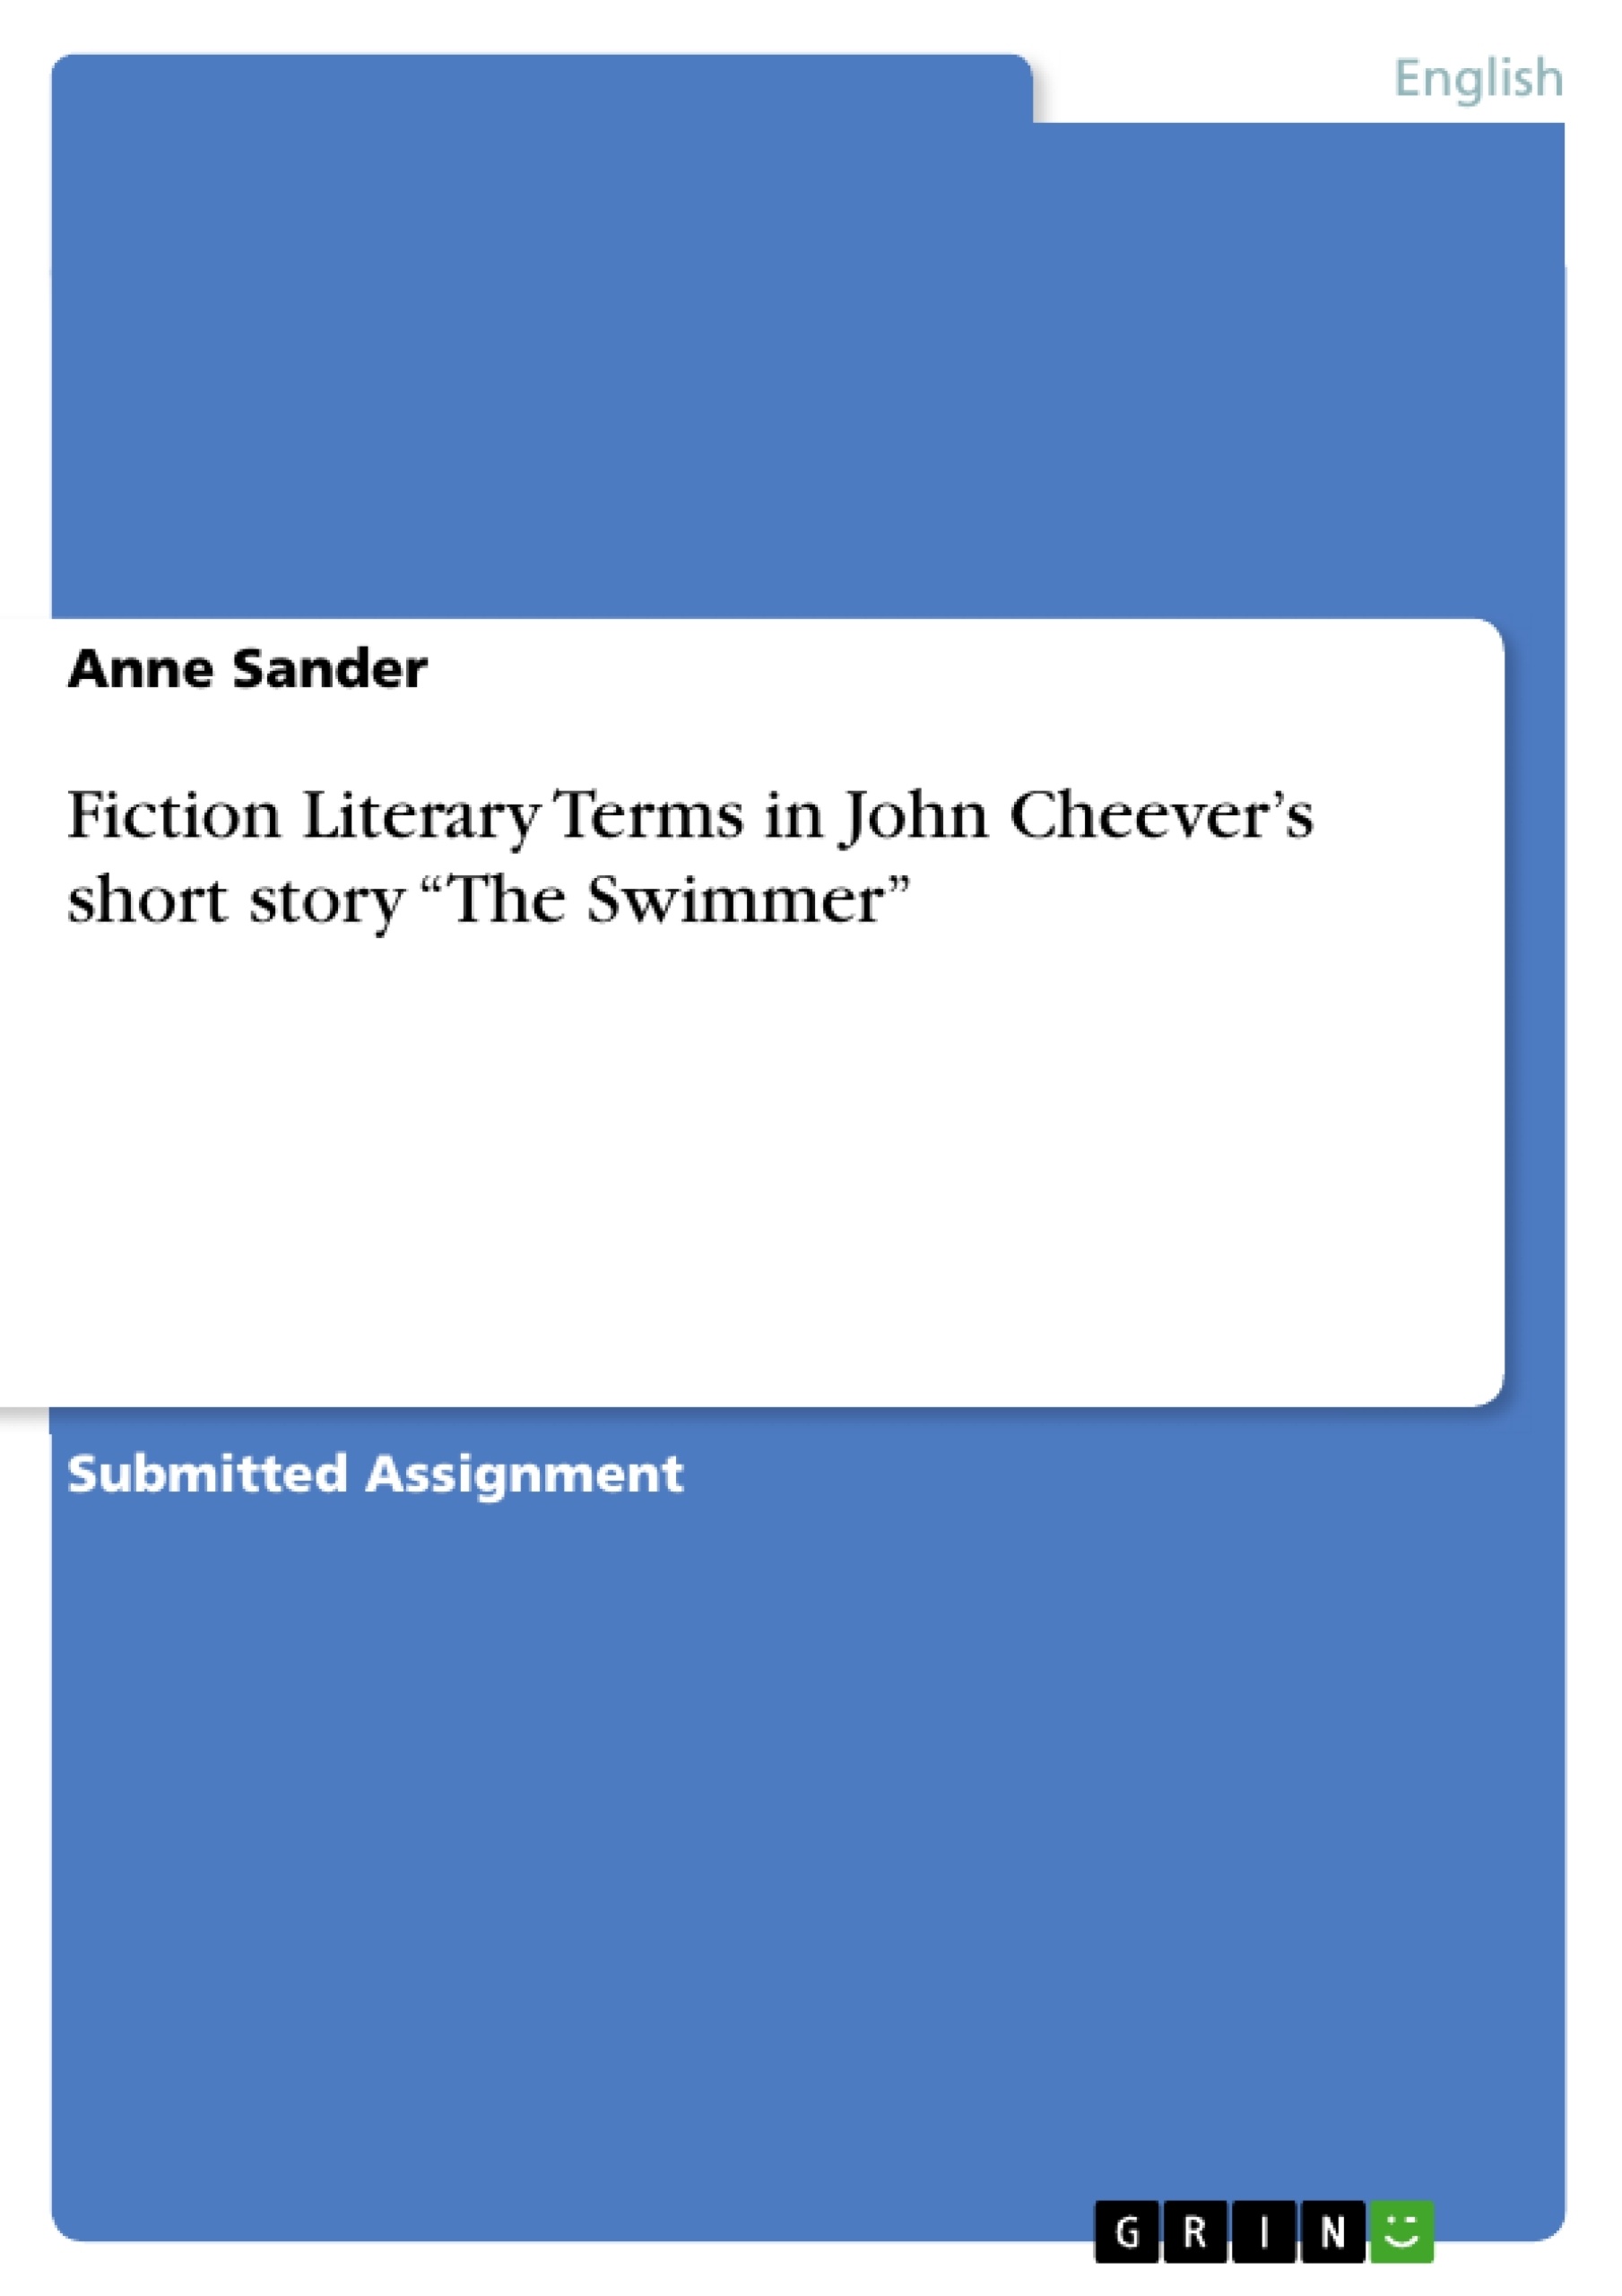 Titre: Fiction Literary Terms in John Cheever’s short story “The Swimmer”